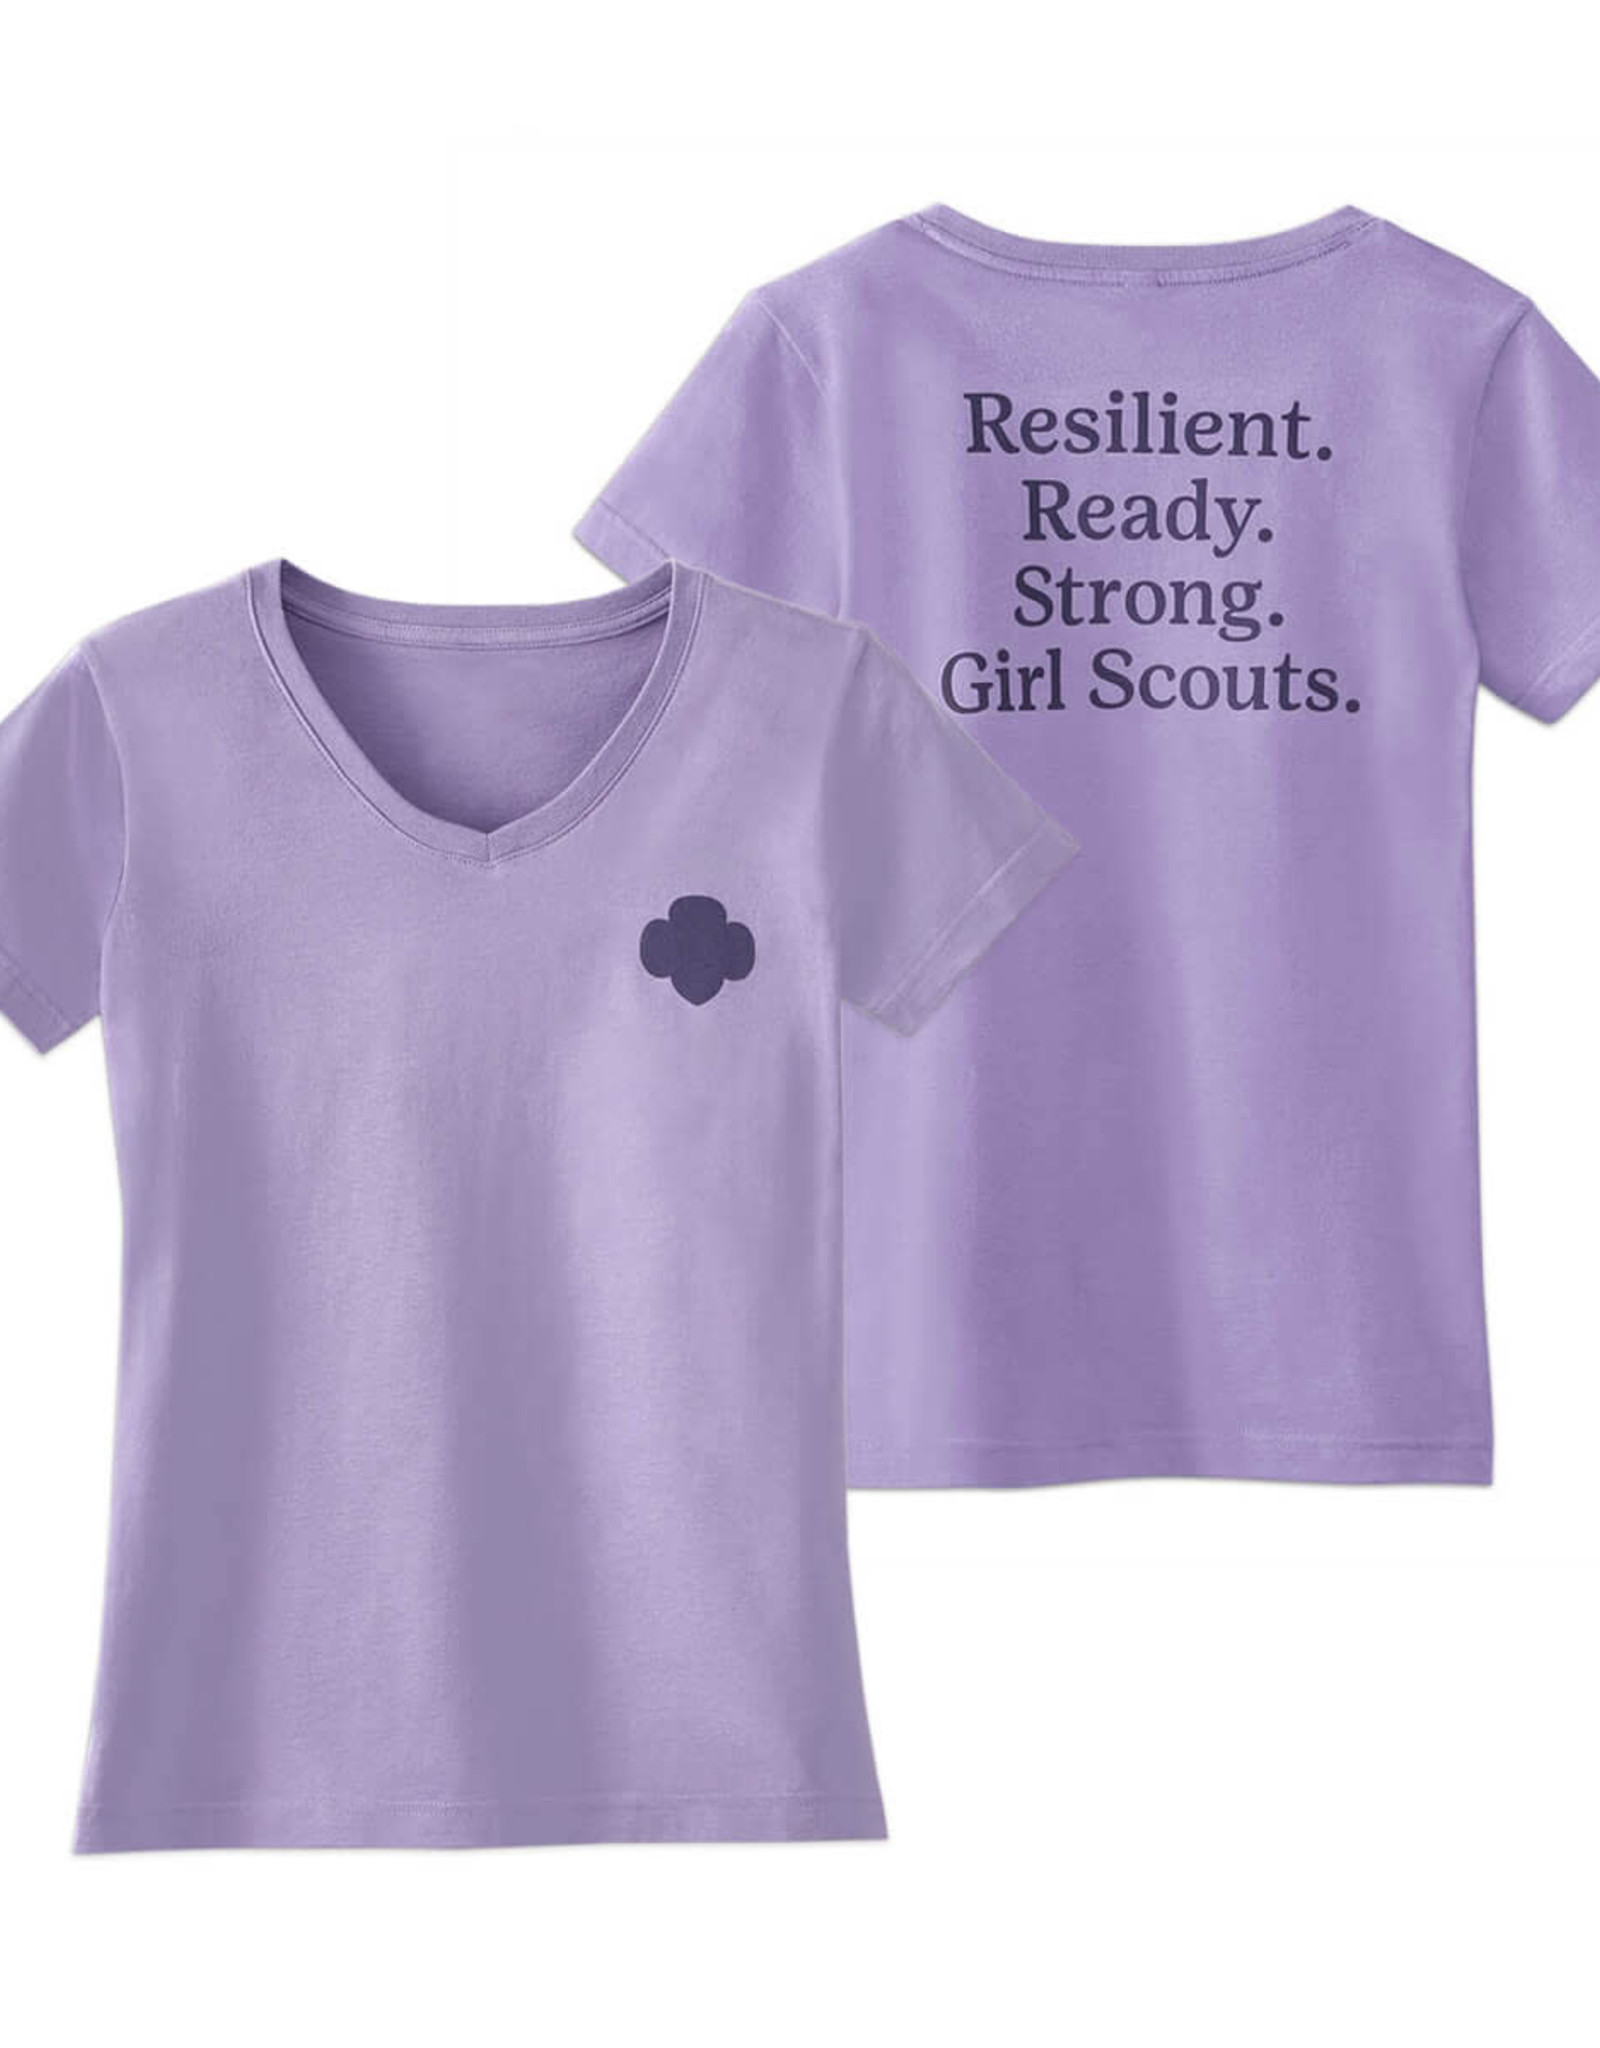 GIRL SCOUTS OF THE USA Resilient Ready Strong T-Shirt